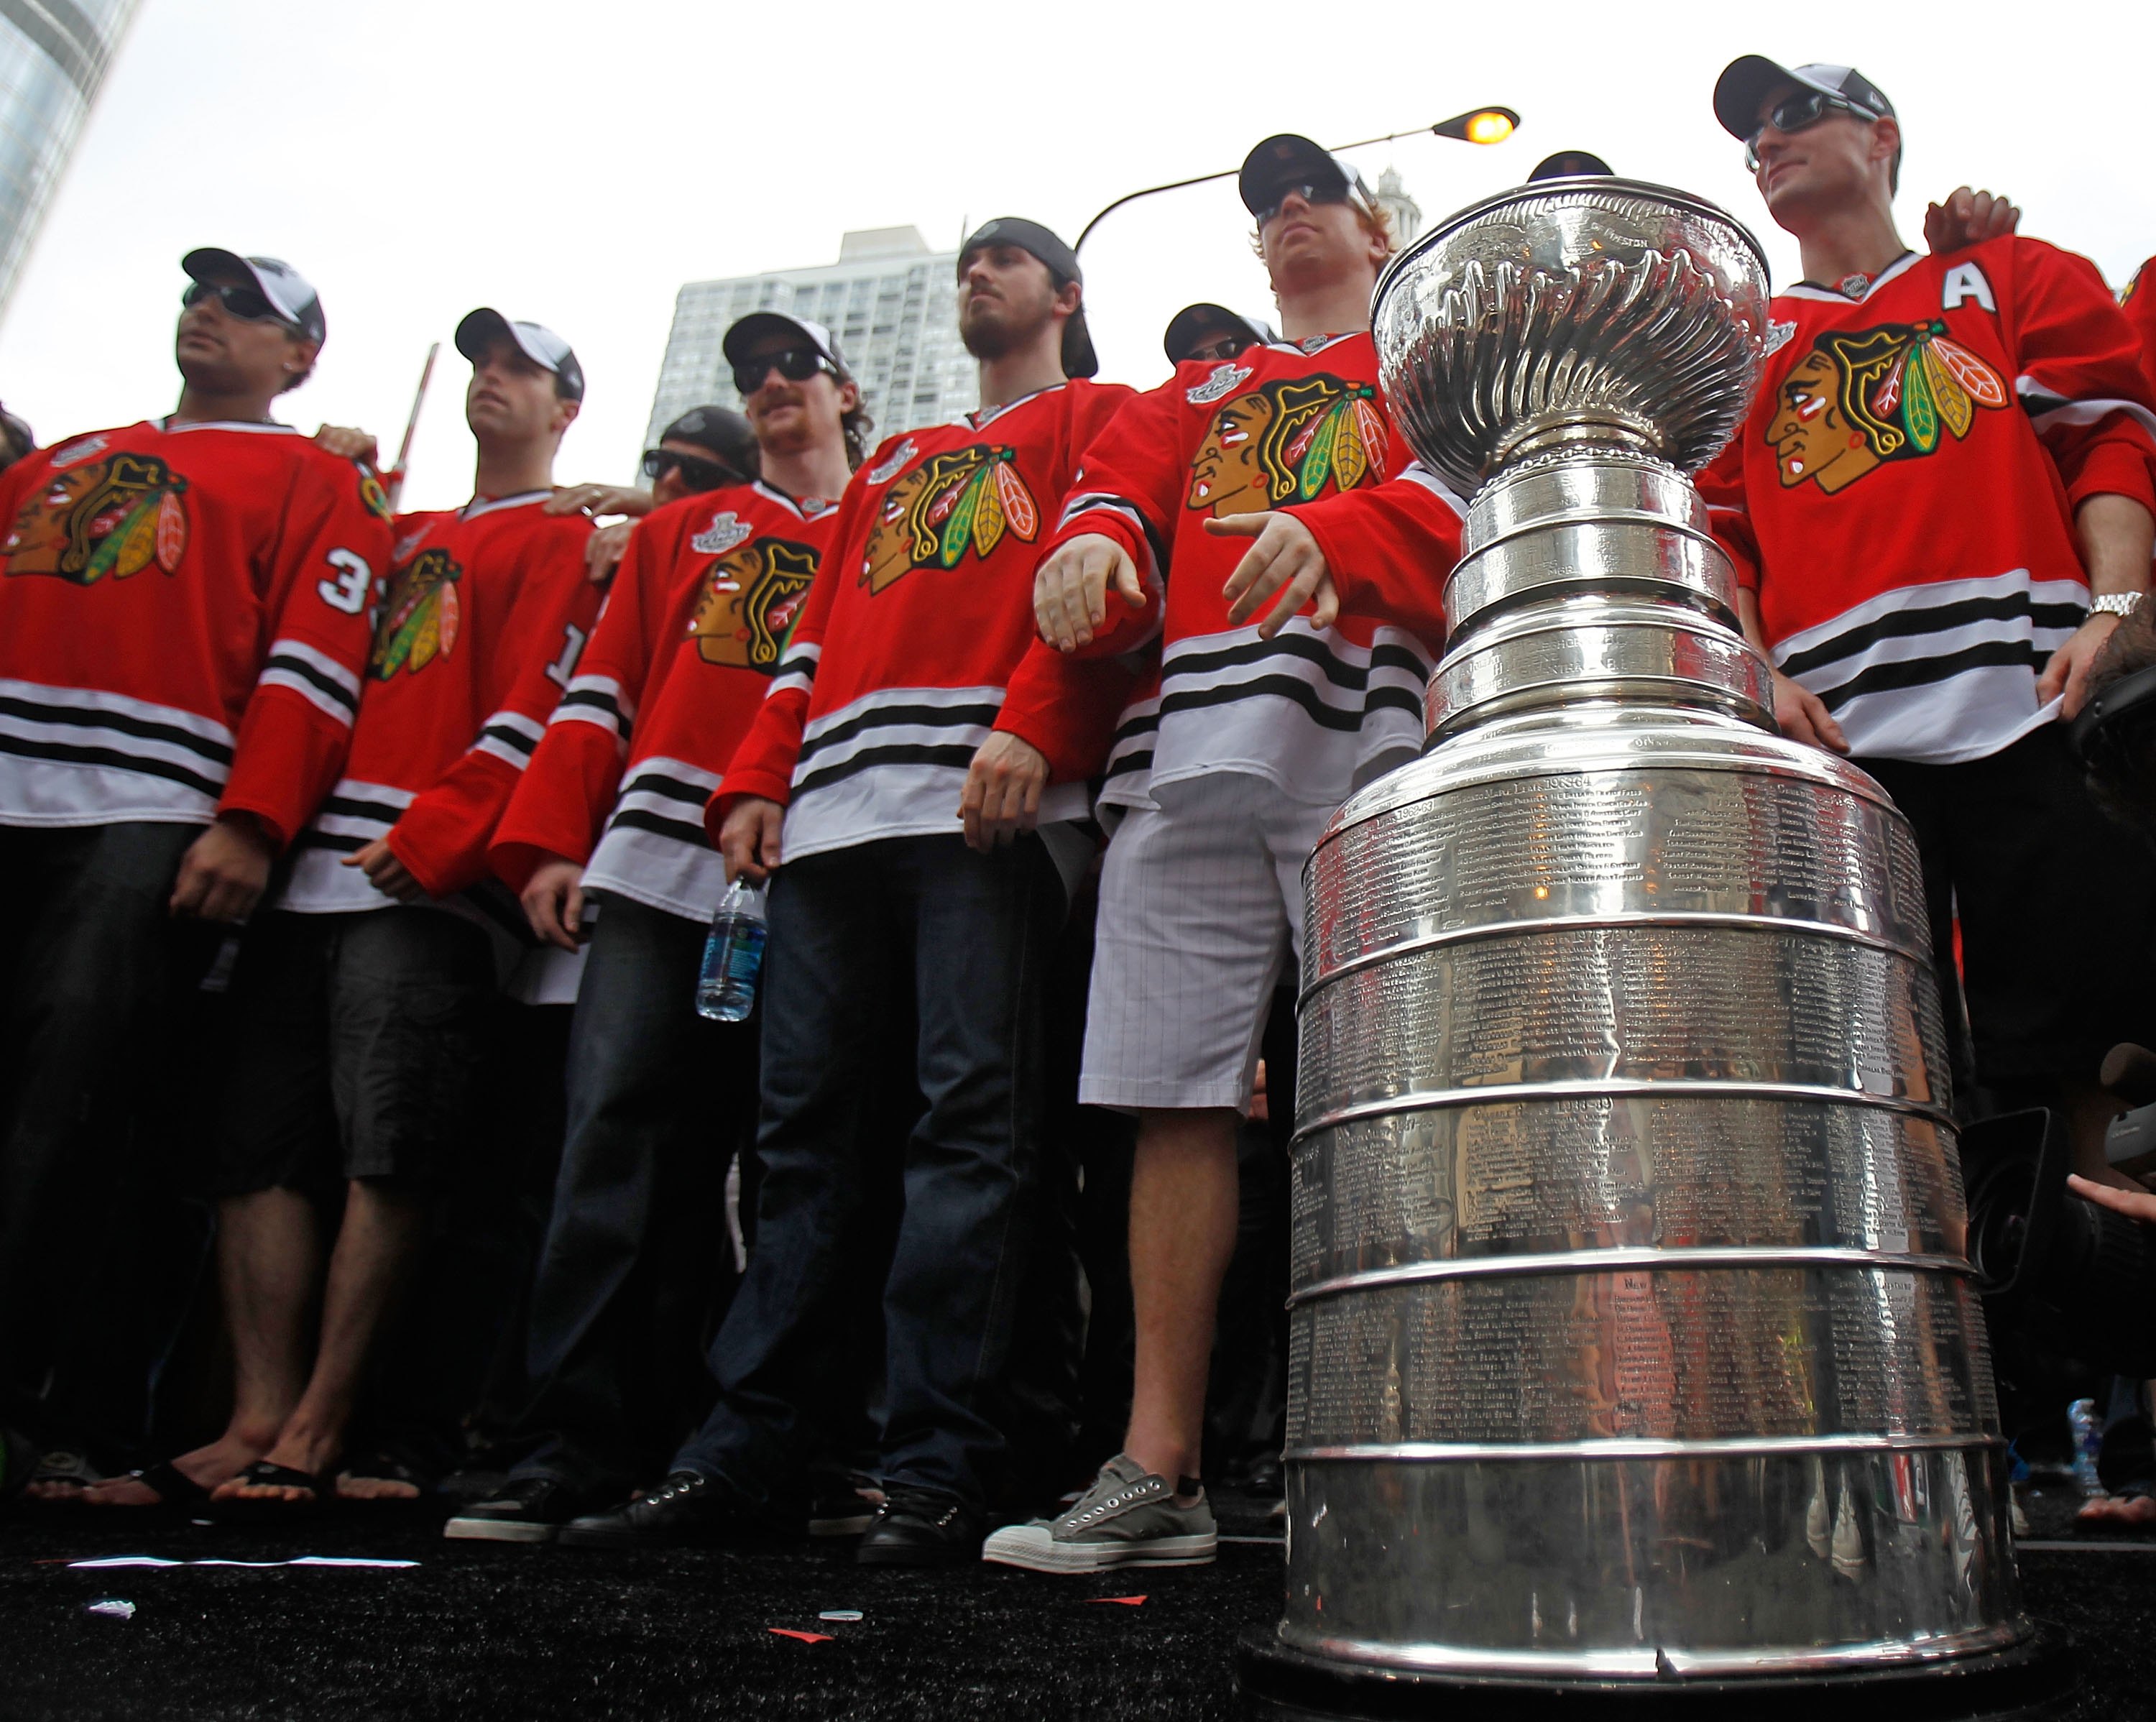 The Last 10 NHL Stanley Cup Champions [Video Recaps] - Ticketmaster Blog